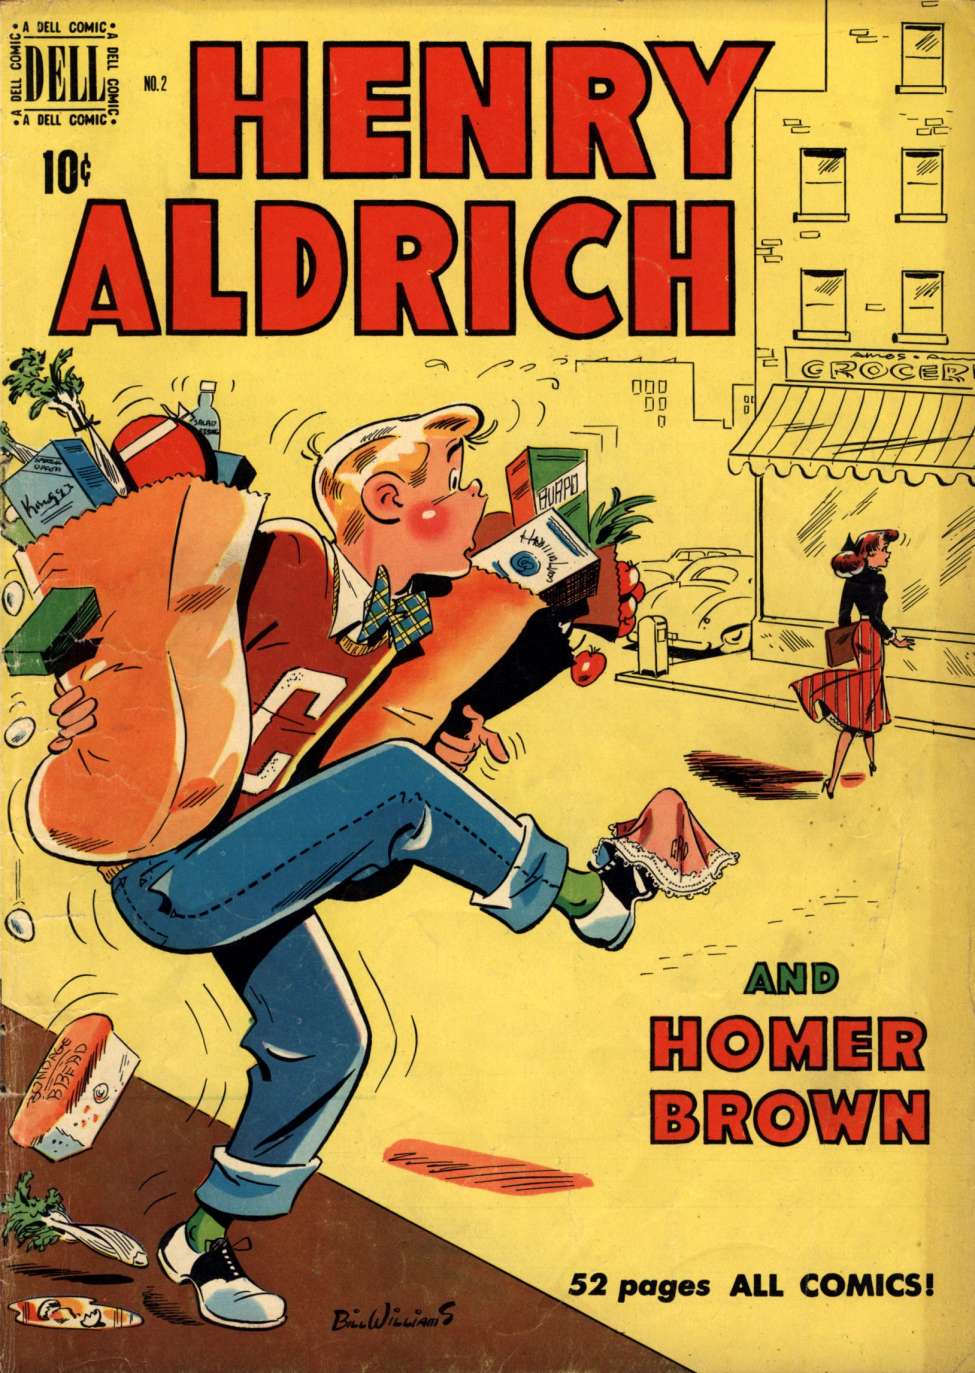 Book Cover For Henry Aldrich 2 - Version 2